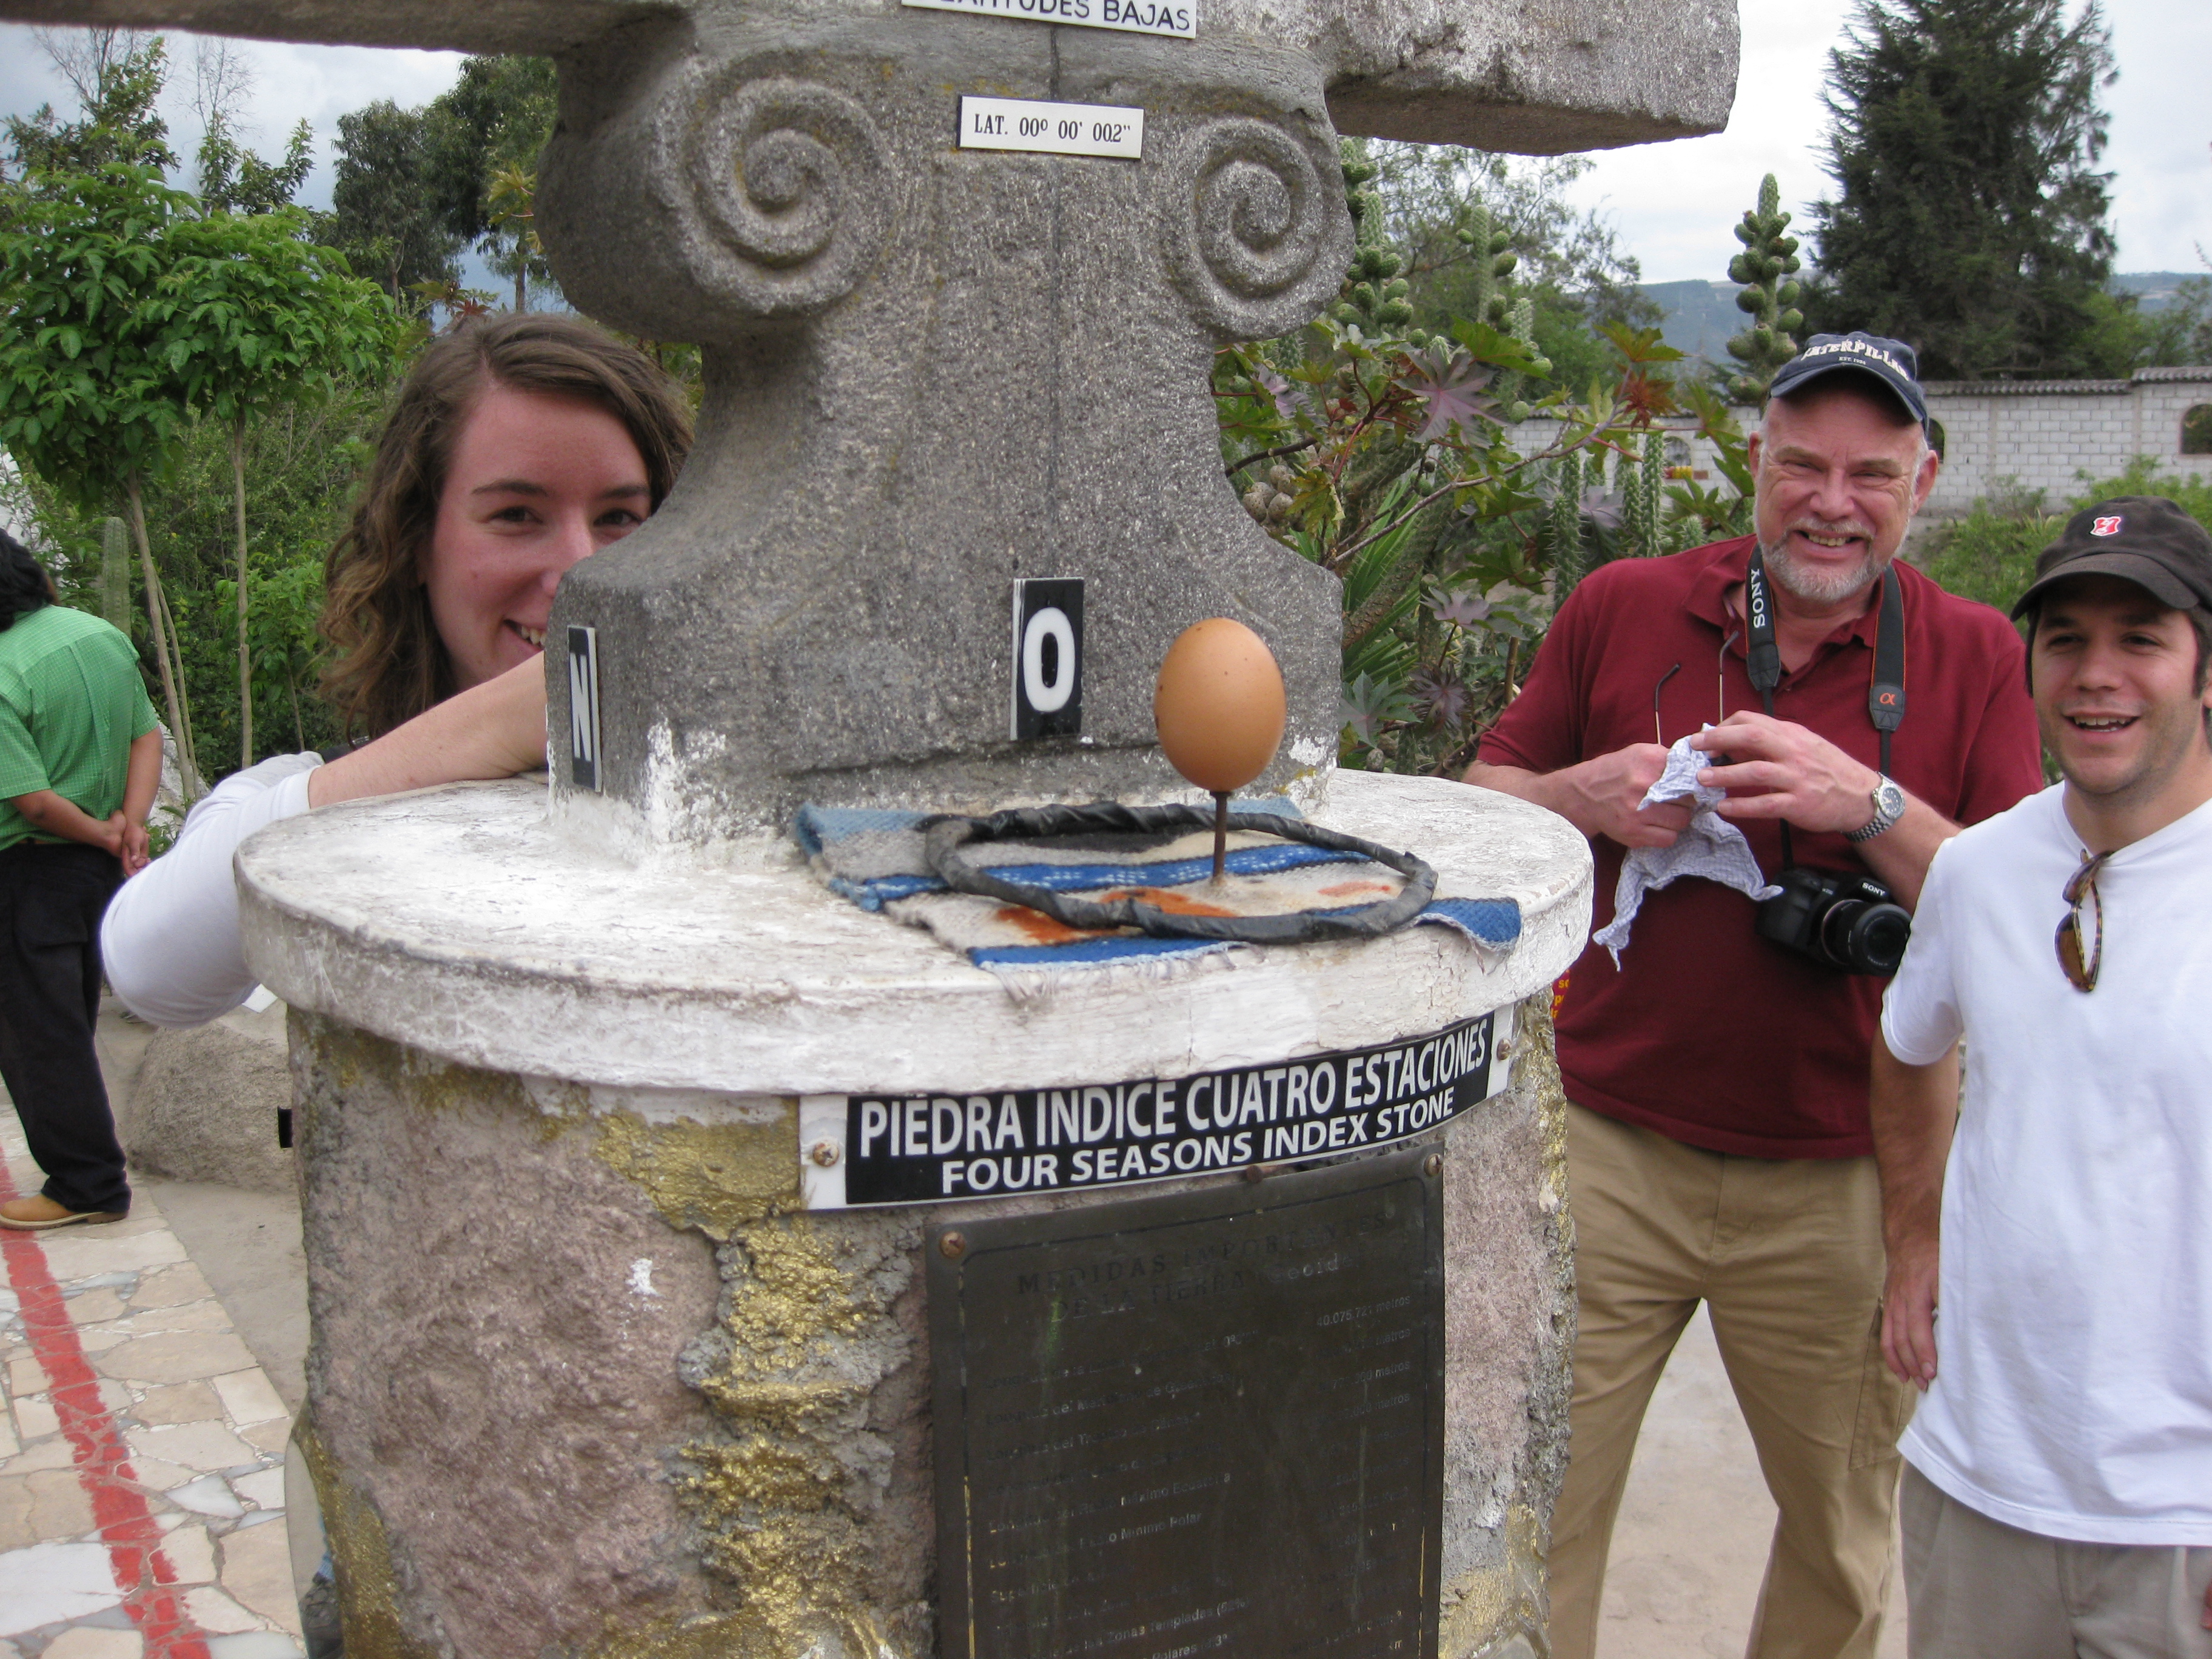 a man and woman standing next to a stone fountain